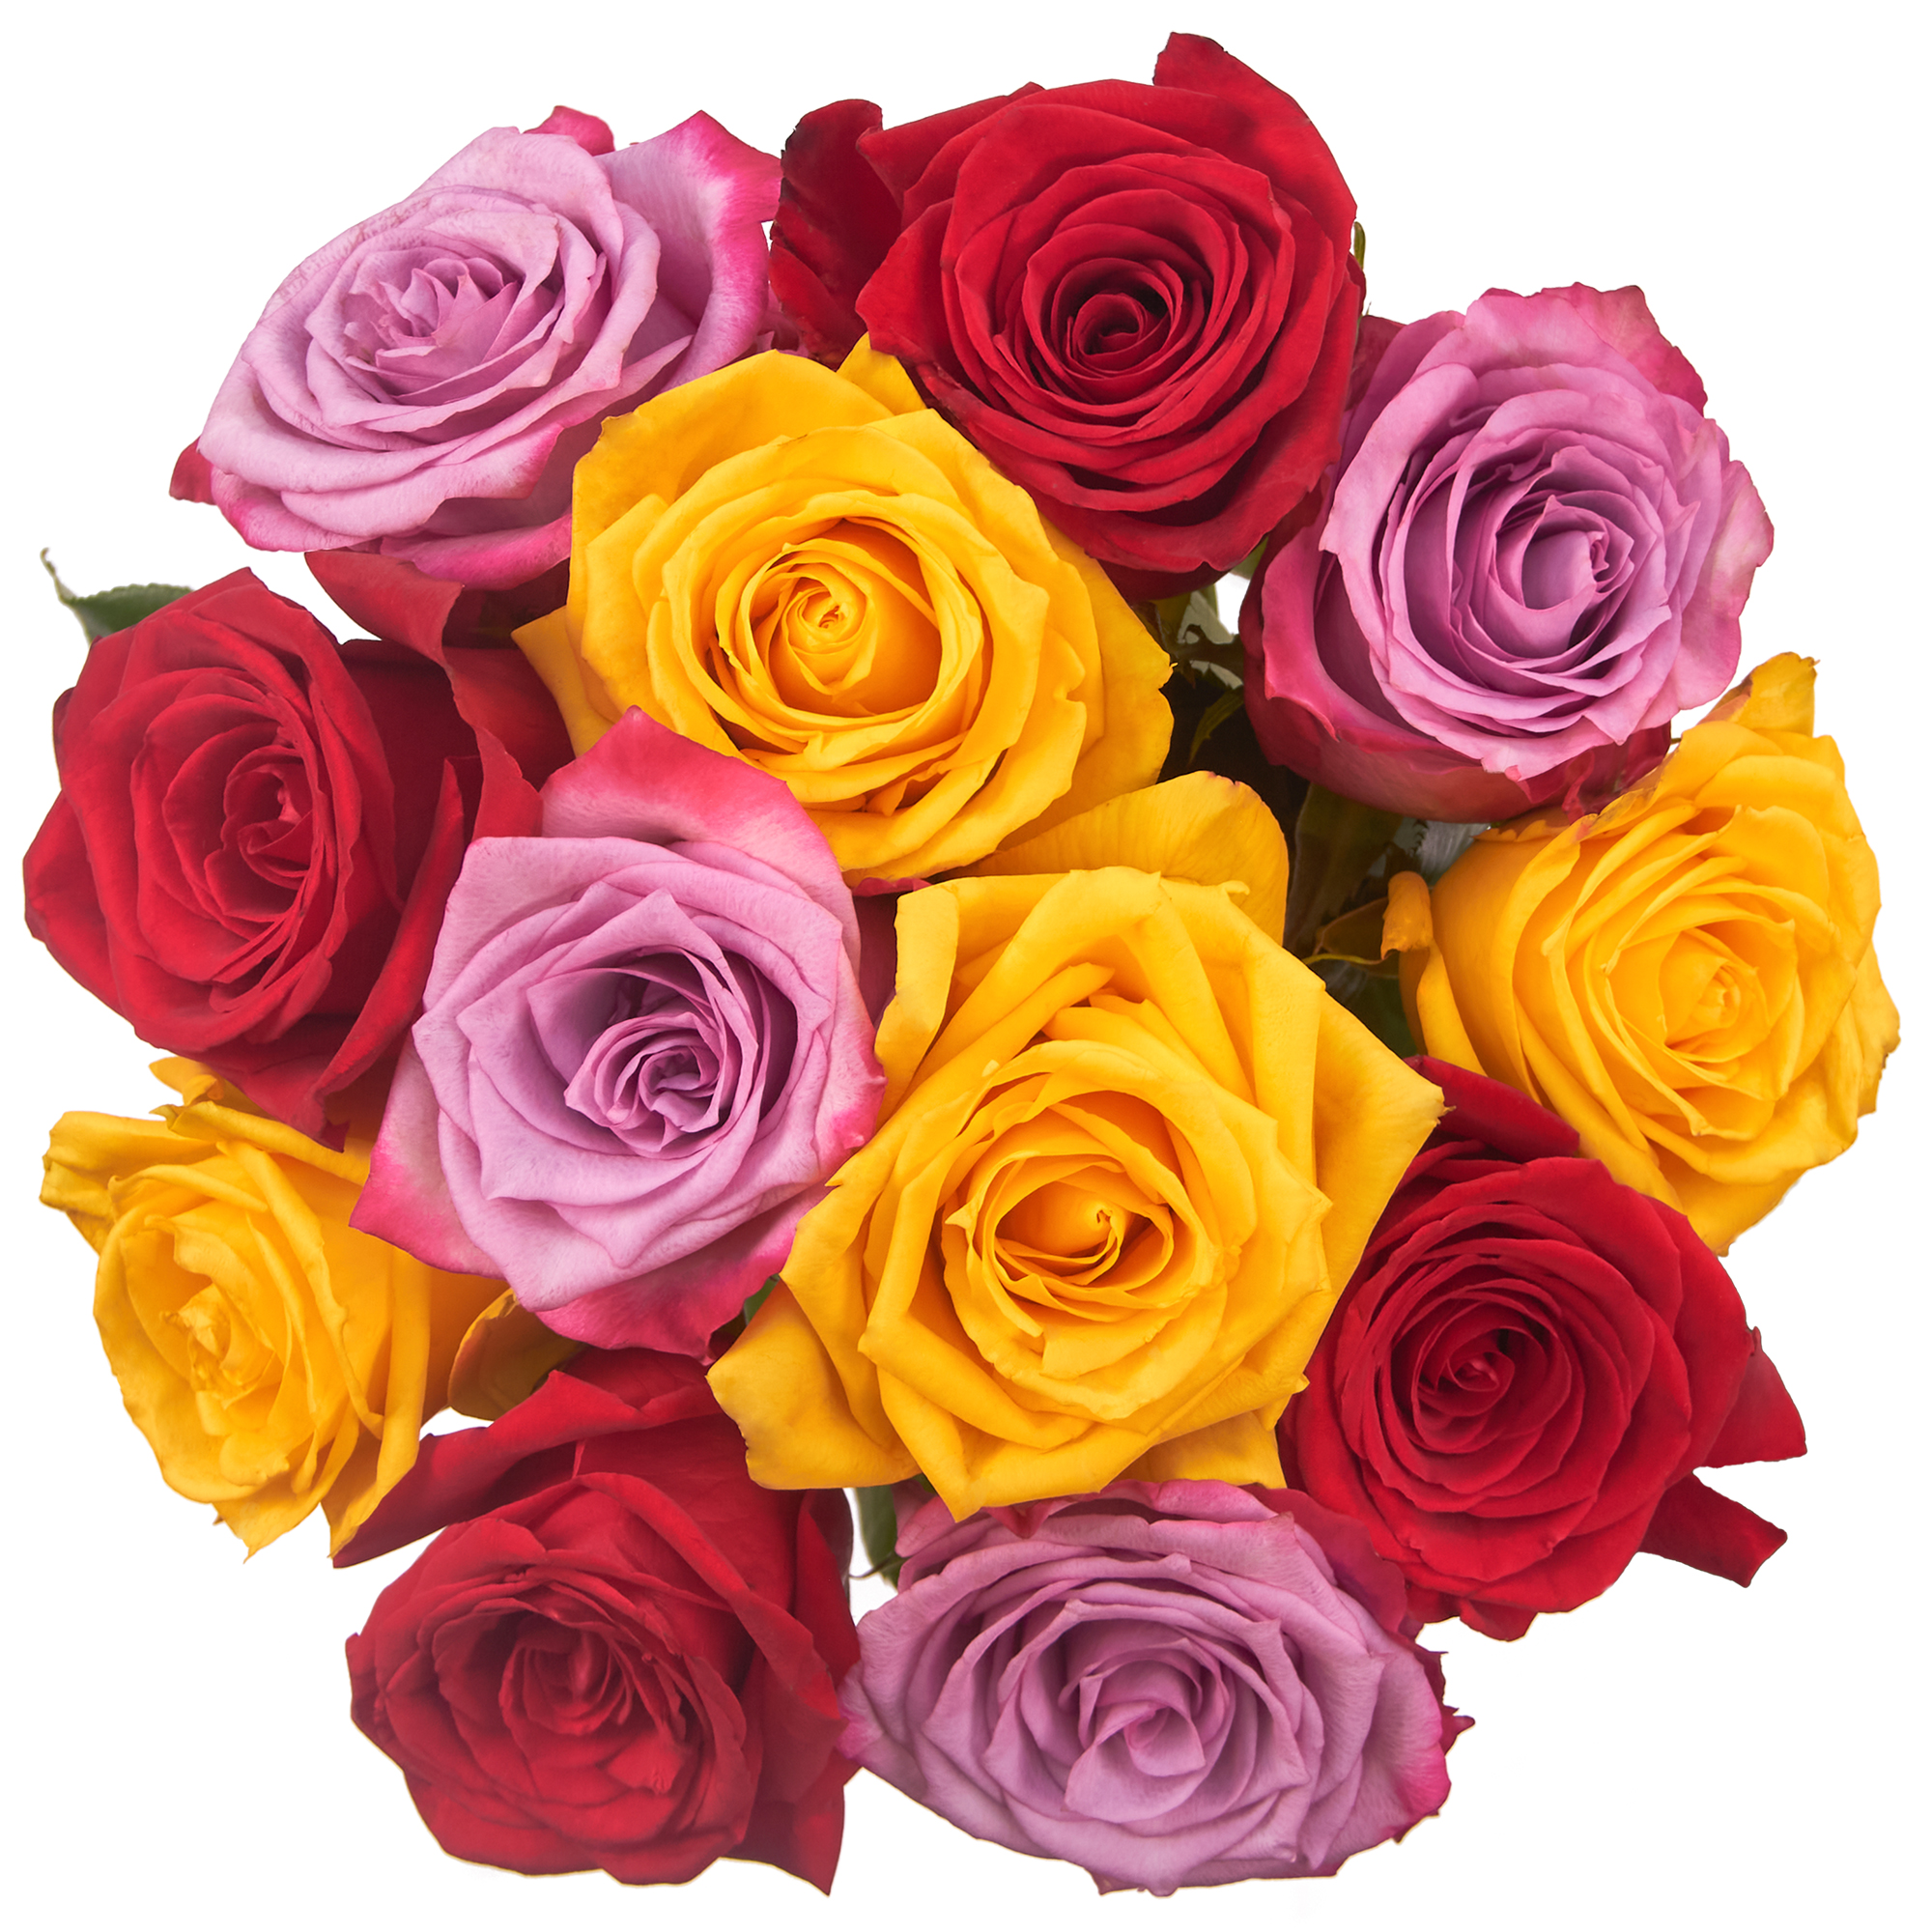 Fresh-Cut Dozen Roses, 12 Stems Assorted Rainbow Colors, Colors Vary - image 5 of 10